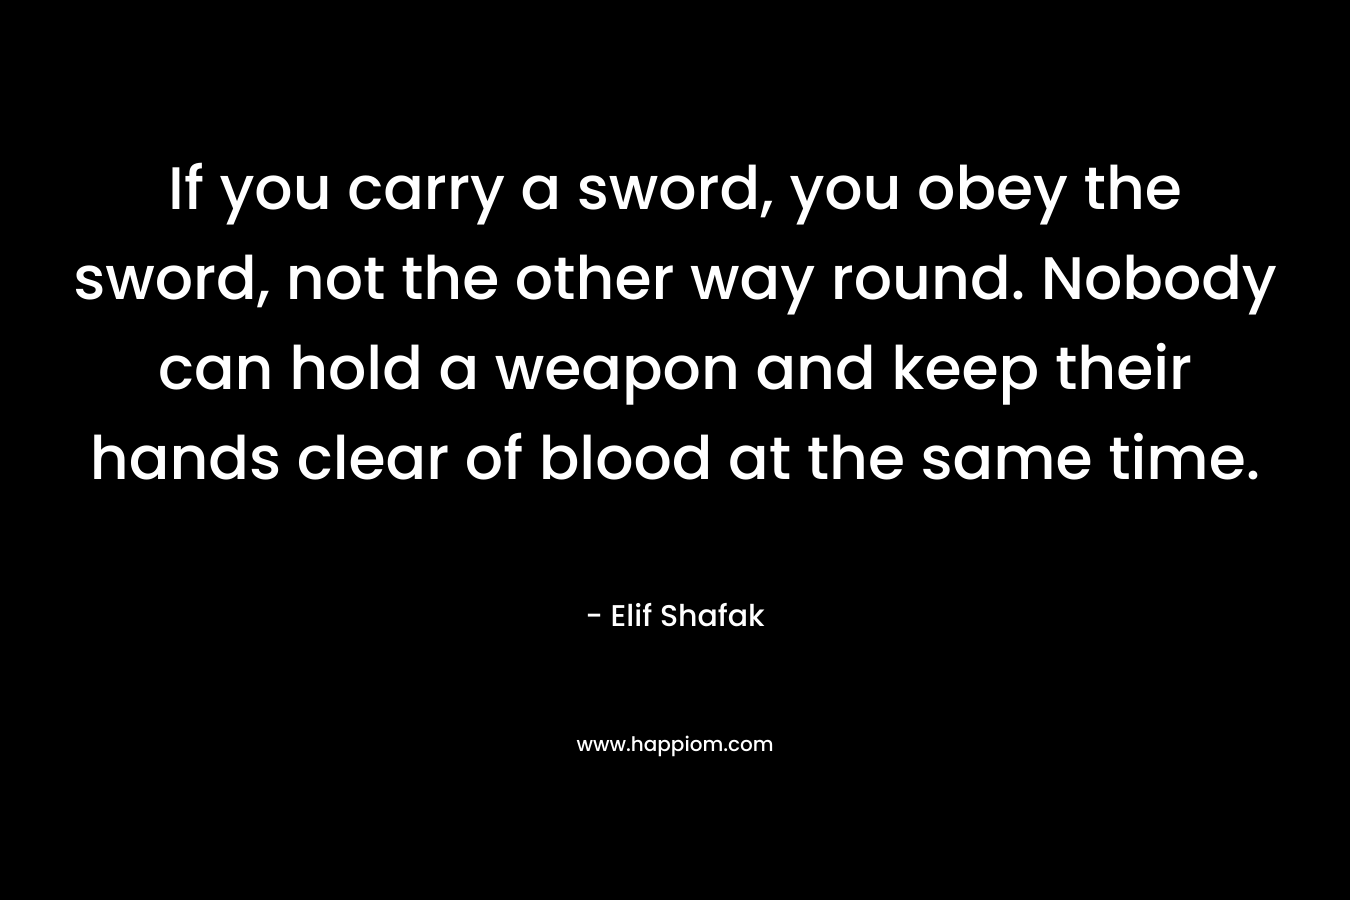 If you carry a sword, you obey the sword, not the other way round. Nobody can hold a weapon and keep their hands clear of blood at the same time.